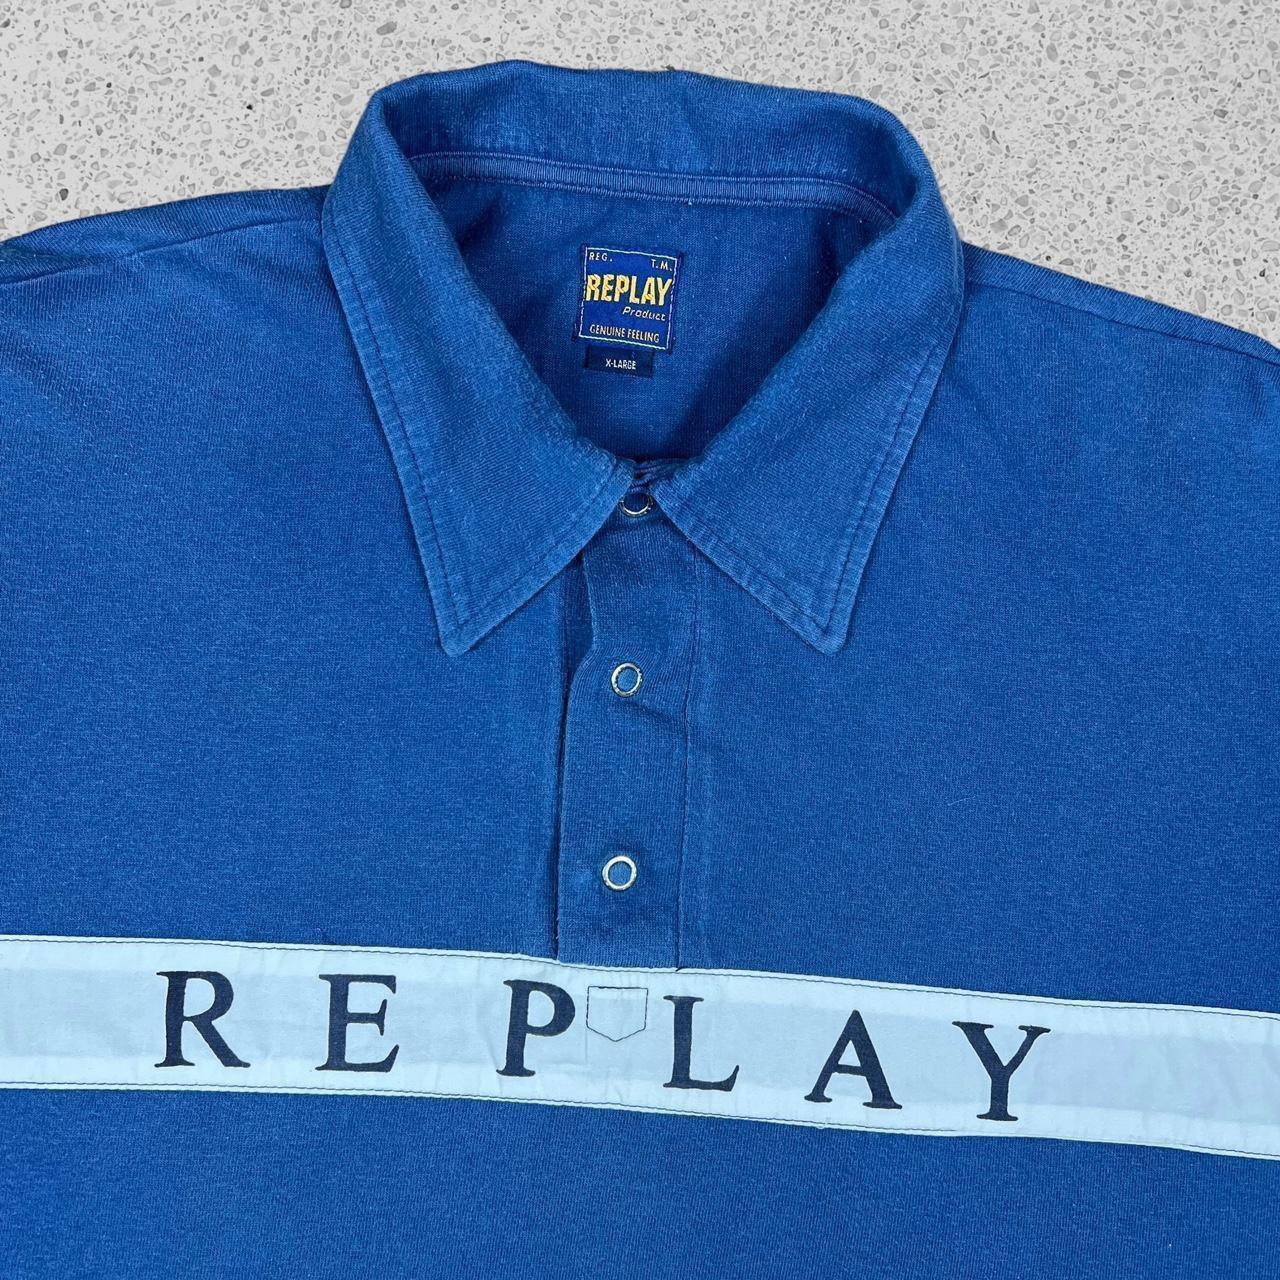 90s vintage polo Replay - 90s vintage shirt Depop blue